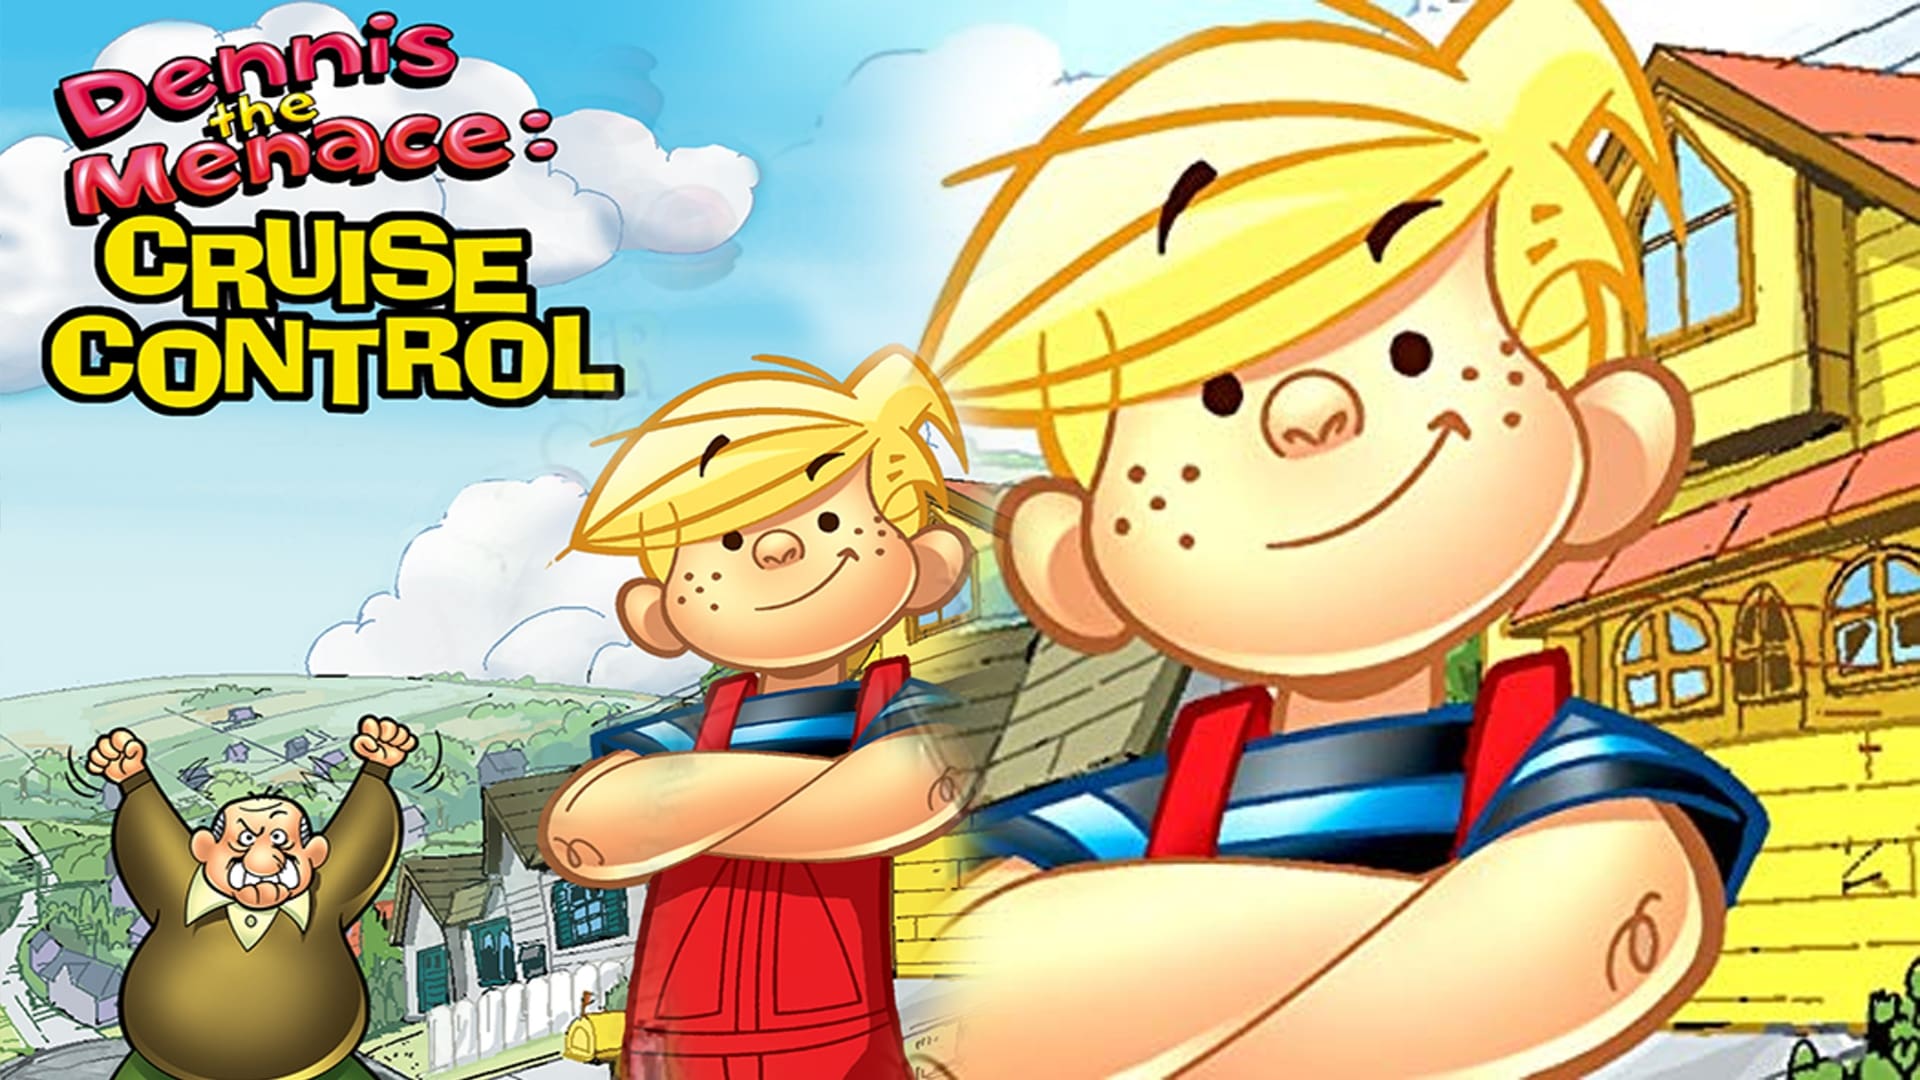 Watch Dennis the Menace: Cruise Control free.